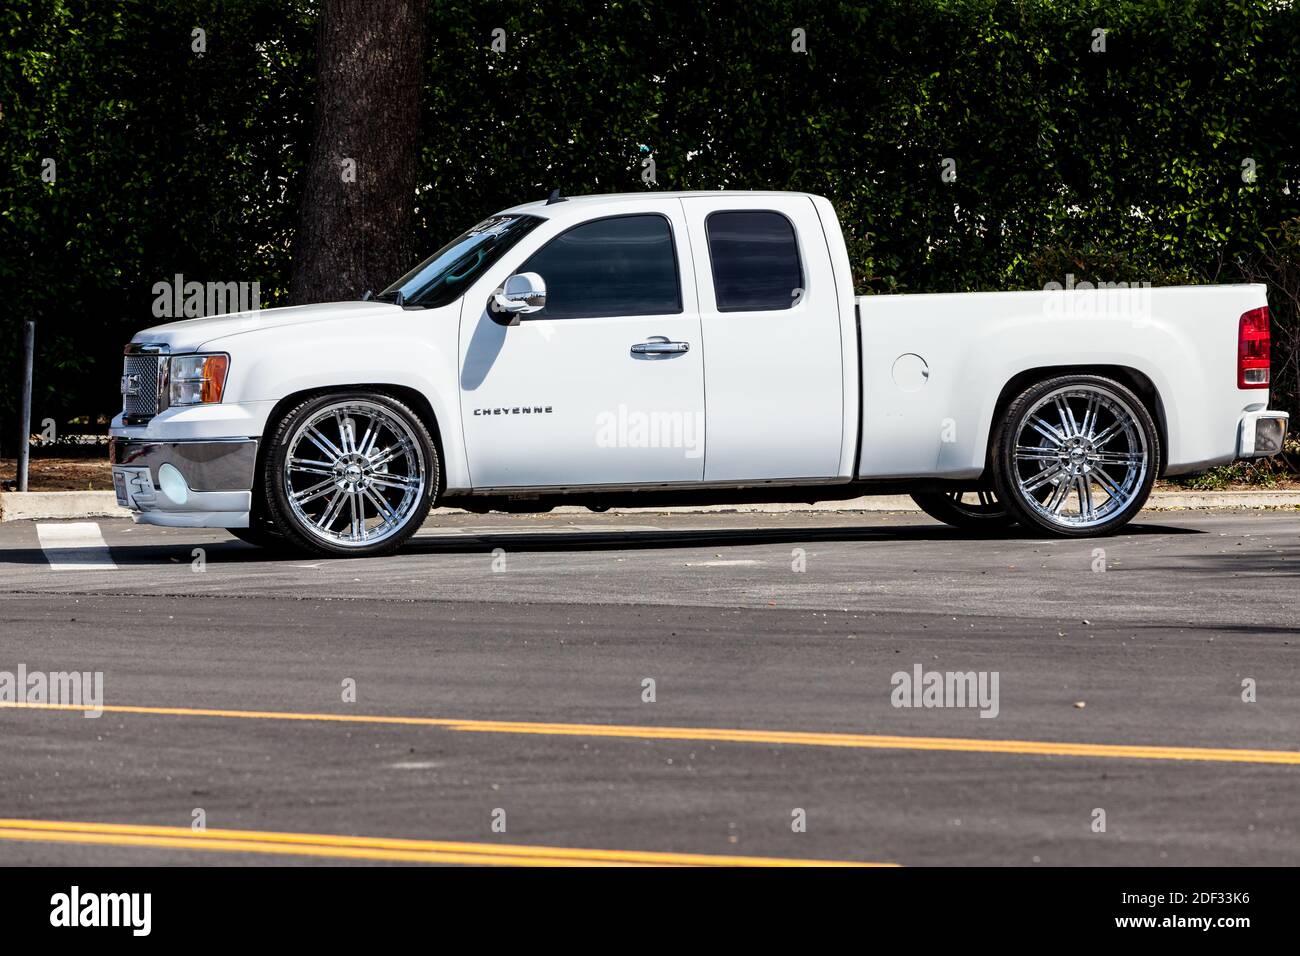 A lowered custom Chevy truck with big wheels Stock Photo